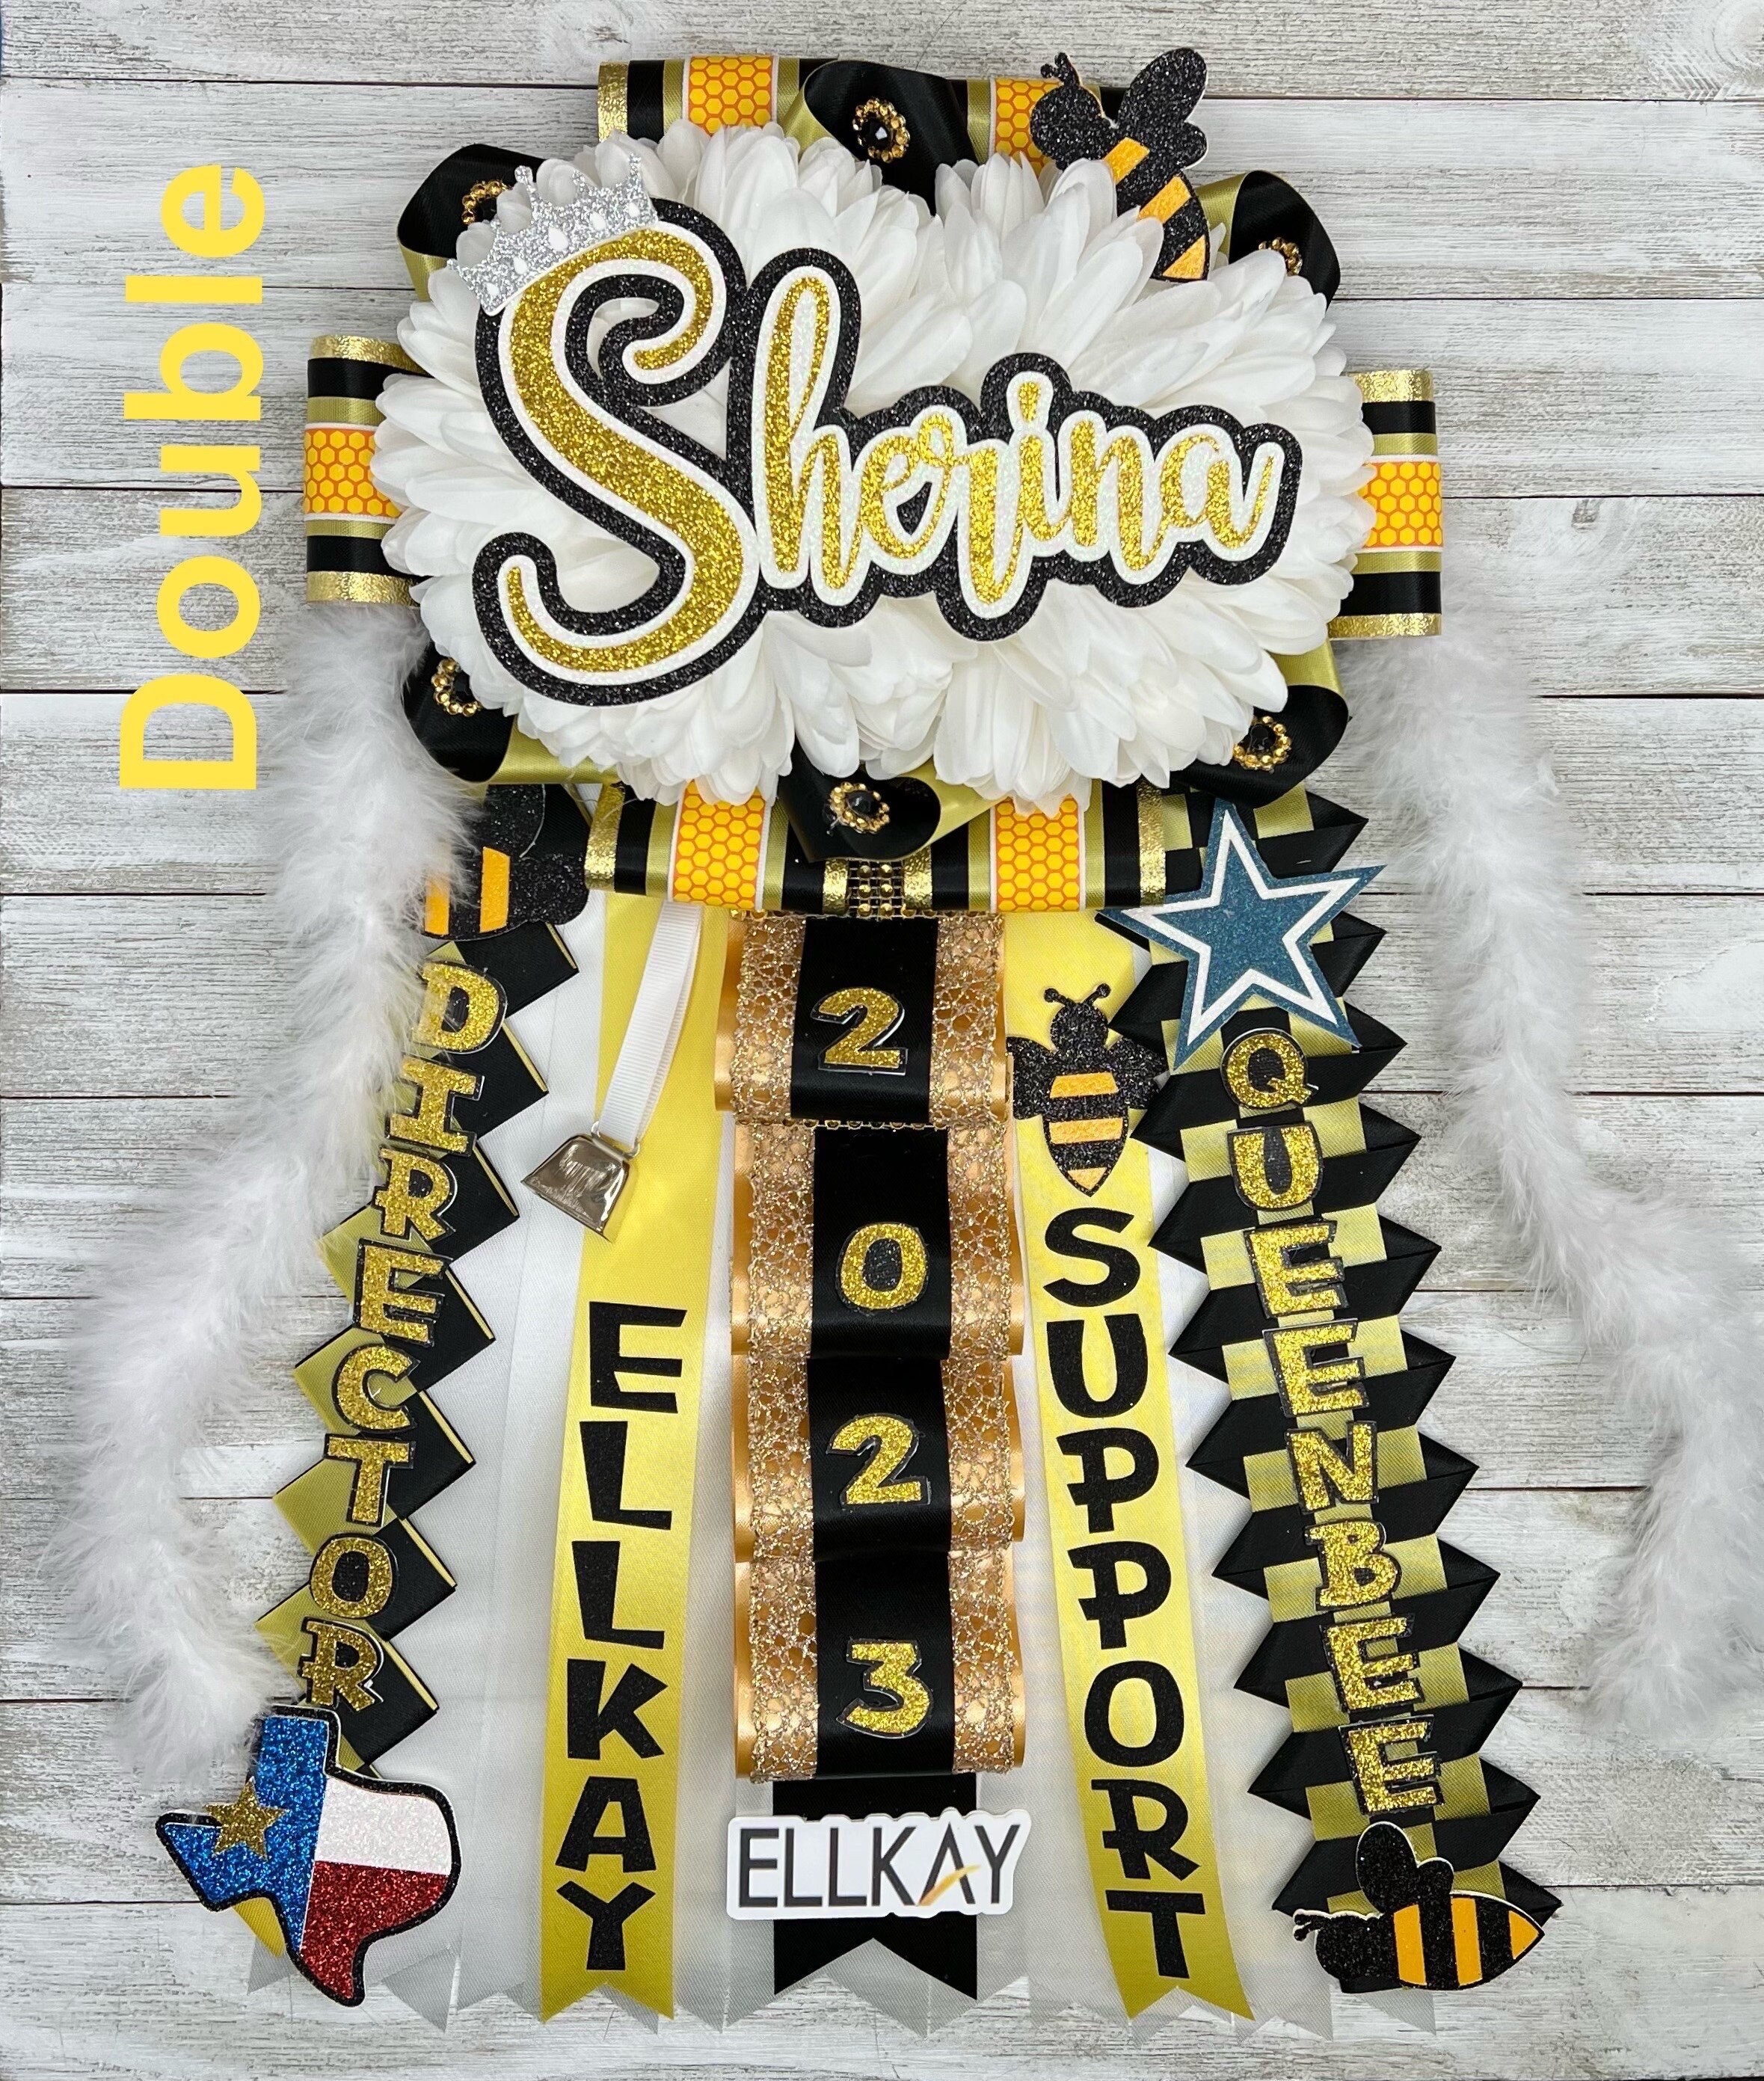 2 HOMECOMING Gold sticker letters CARD with glitter & bling 4 repeats